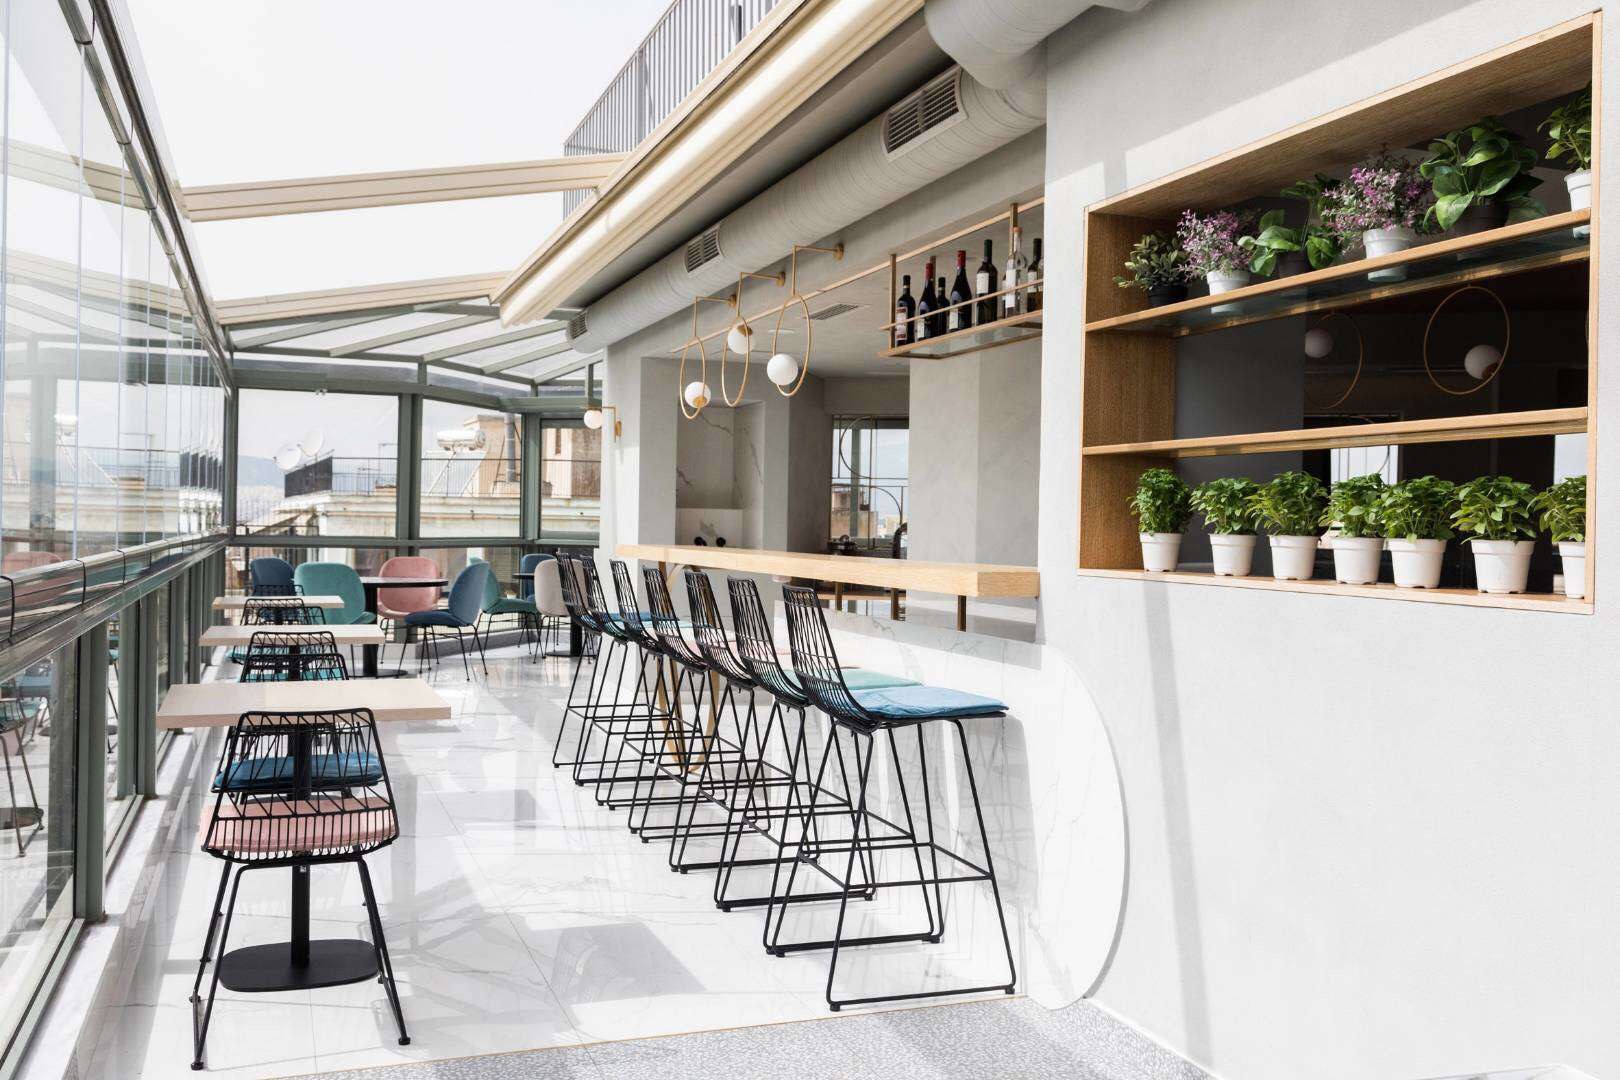 Fluo creates rooftop bar and breakfast room at Evripidis hot(图8)